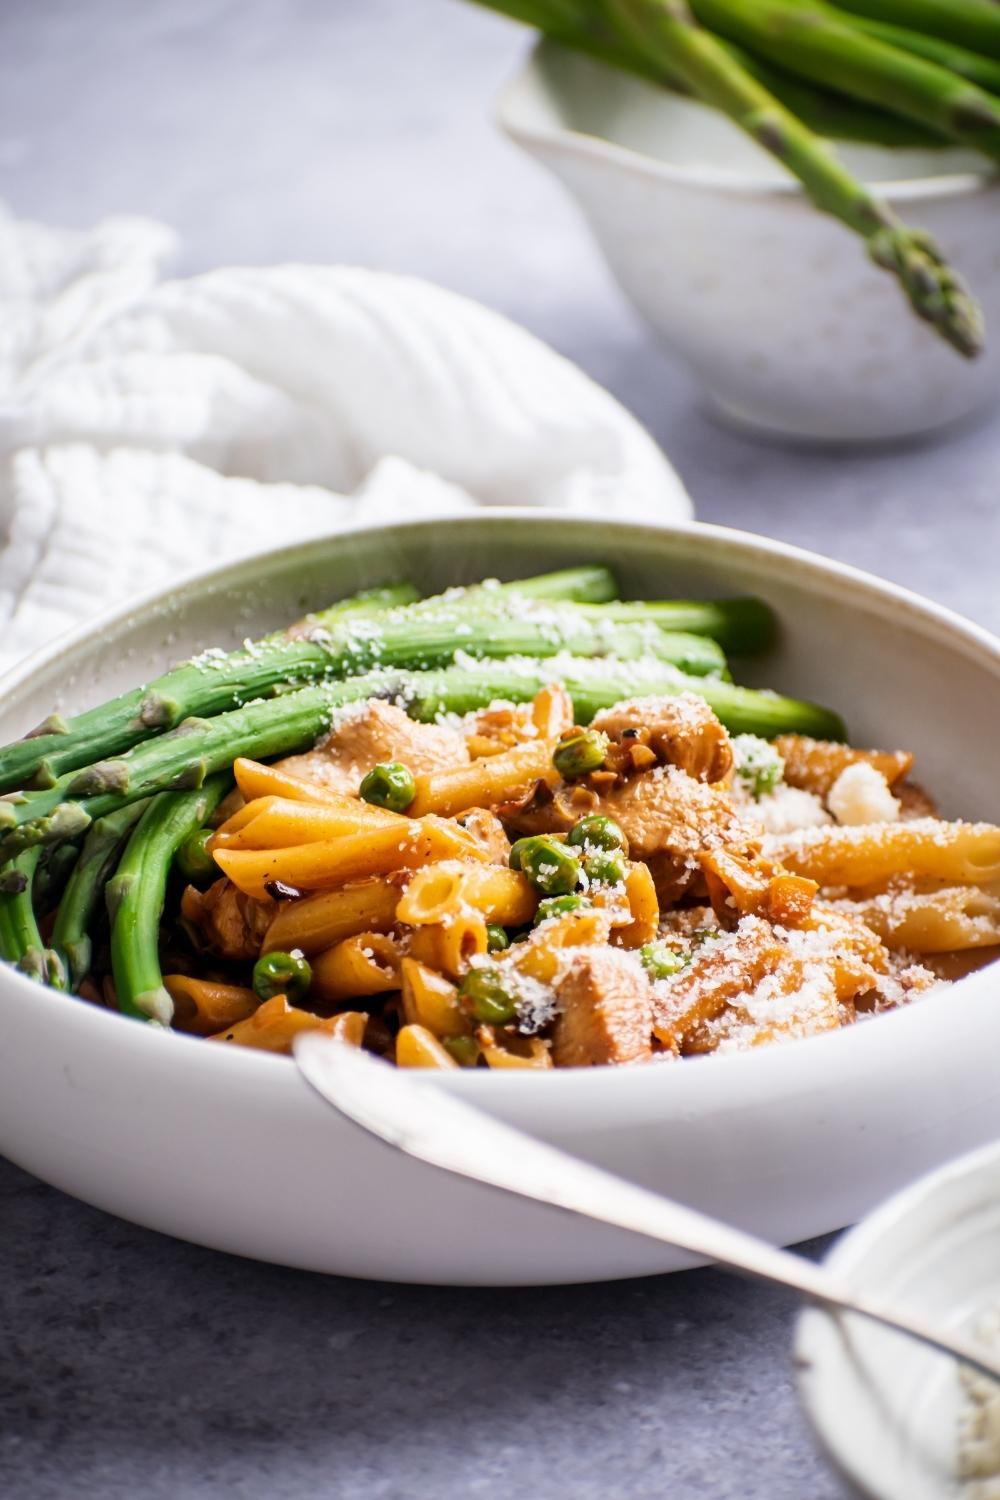 A side view of a bowl with Spicy Chicken Chipotle Pasta and asparagus topped with parmesan cheese.